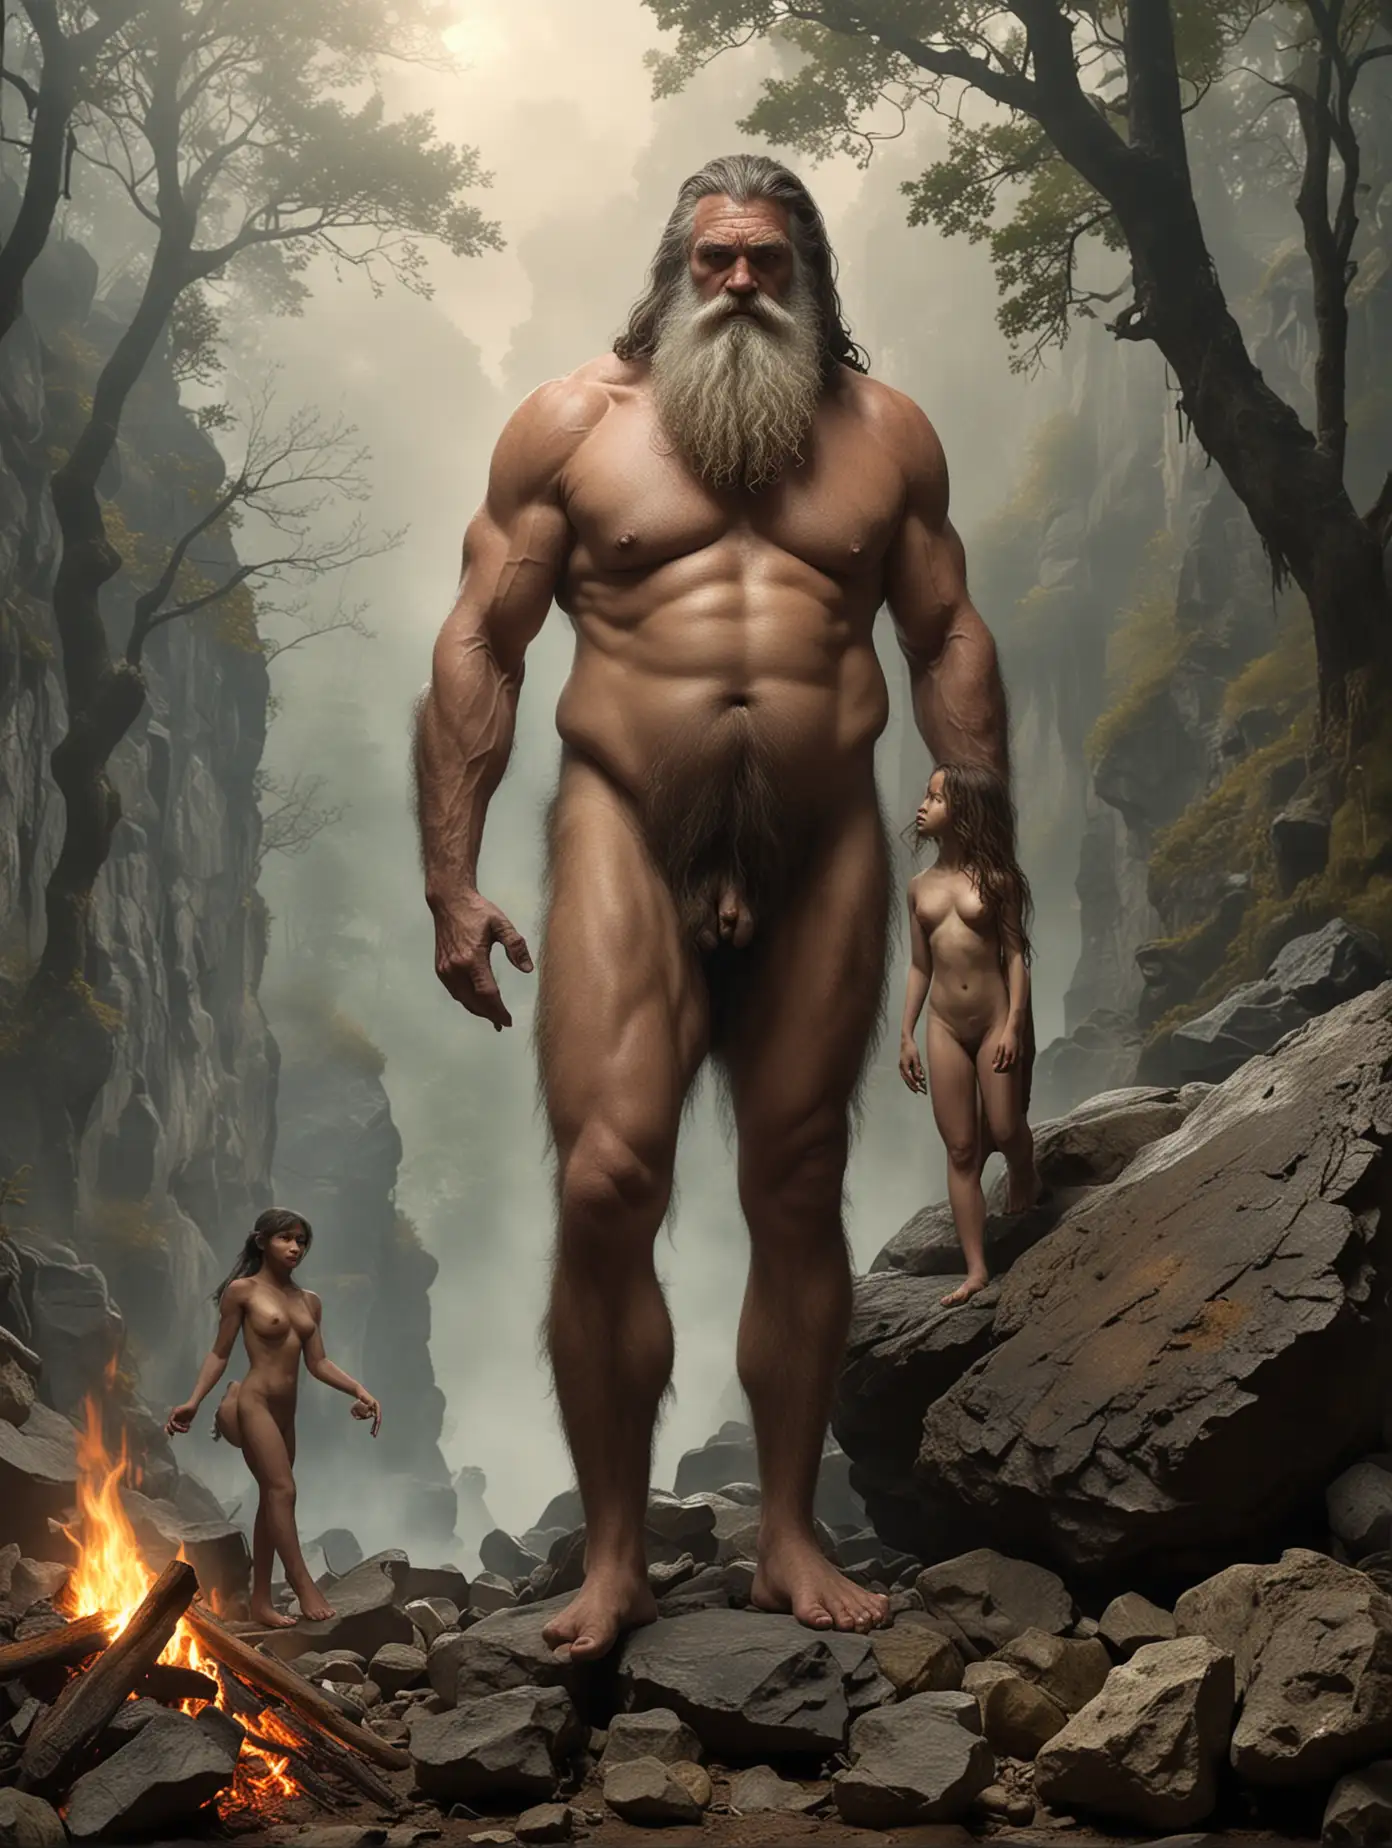 One very large muscular male Hill giant, forest cave, cooking fire, large feet, large hand, nude, fat, primitive, hairy, long beard, old age, standing on rock, misty, holding a young large breasted nude black female who is much smaller in his left hand